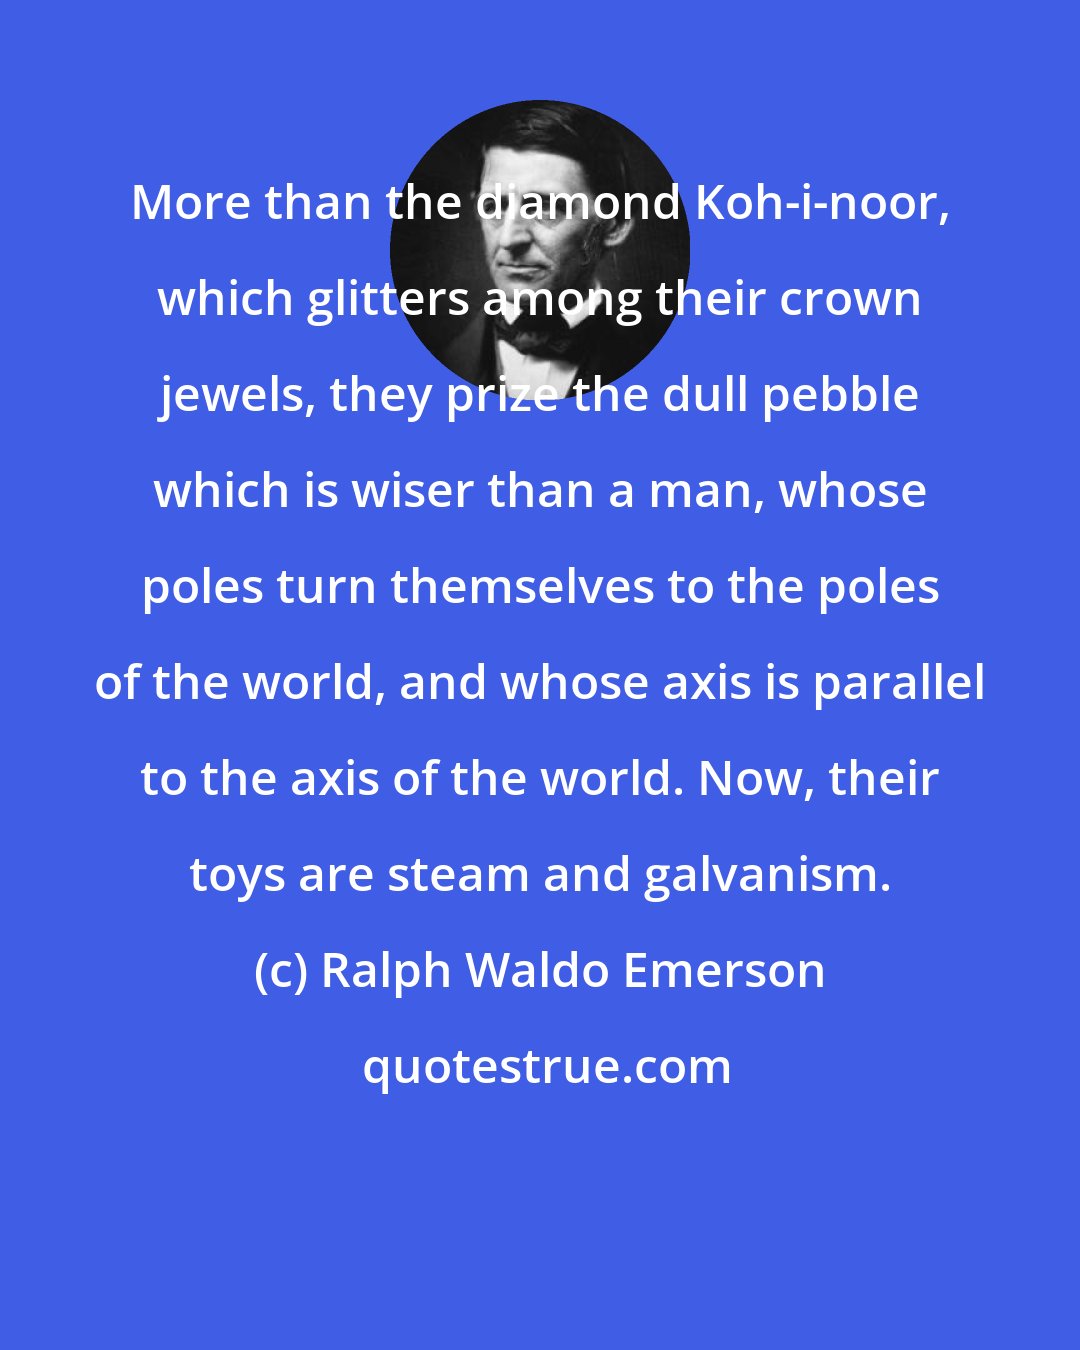 Ralph Waldo Emerson: More than the diamond Koh-i-noor, which glitters among their crown jewels, they prize the dull pebble which is wiser than a man, whose poles turn themselves to the poles of the world, and whose axis is parallel to the axis of the world. Now, their toys are steam and galvanism.